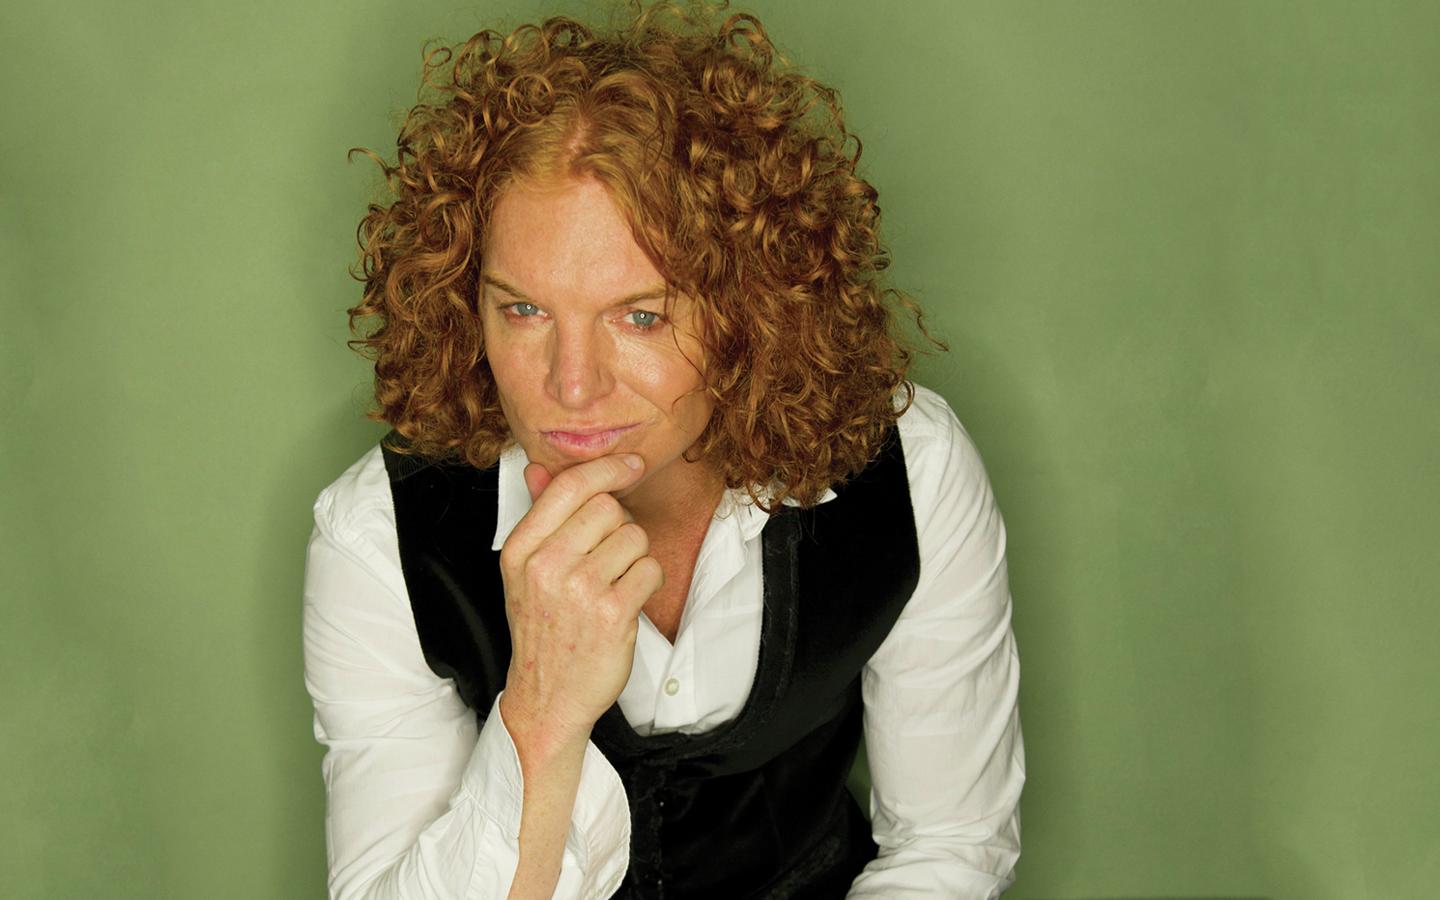 Carrot Top | Hire Summit Comedy, Inc.